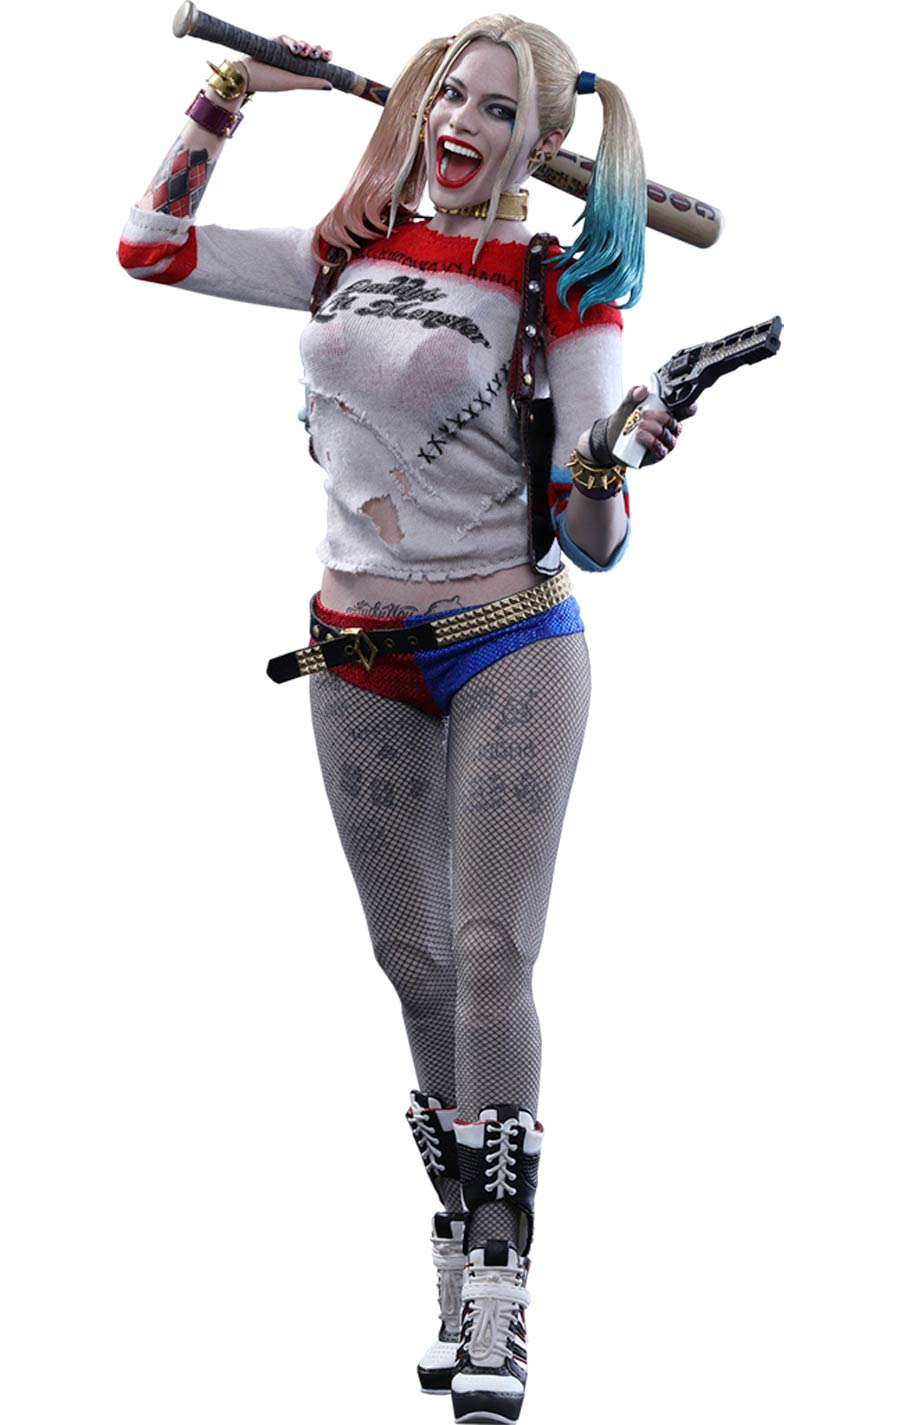 Suicide Squad Movie Harley Quinn 11.5-inch Action Figure